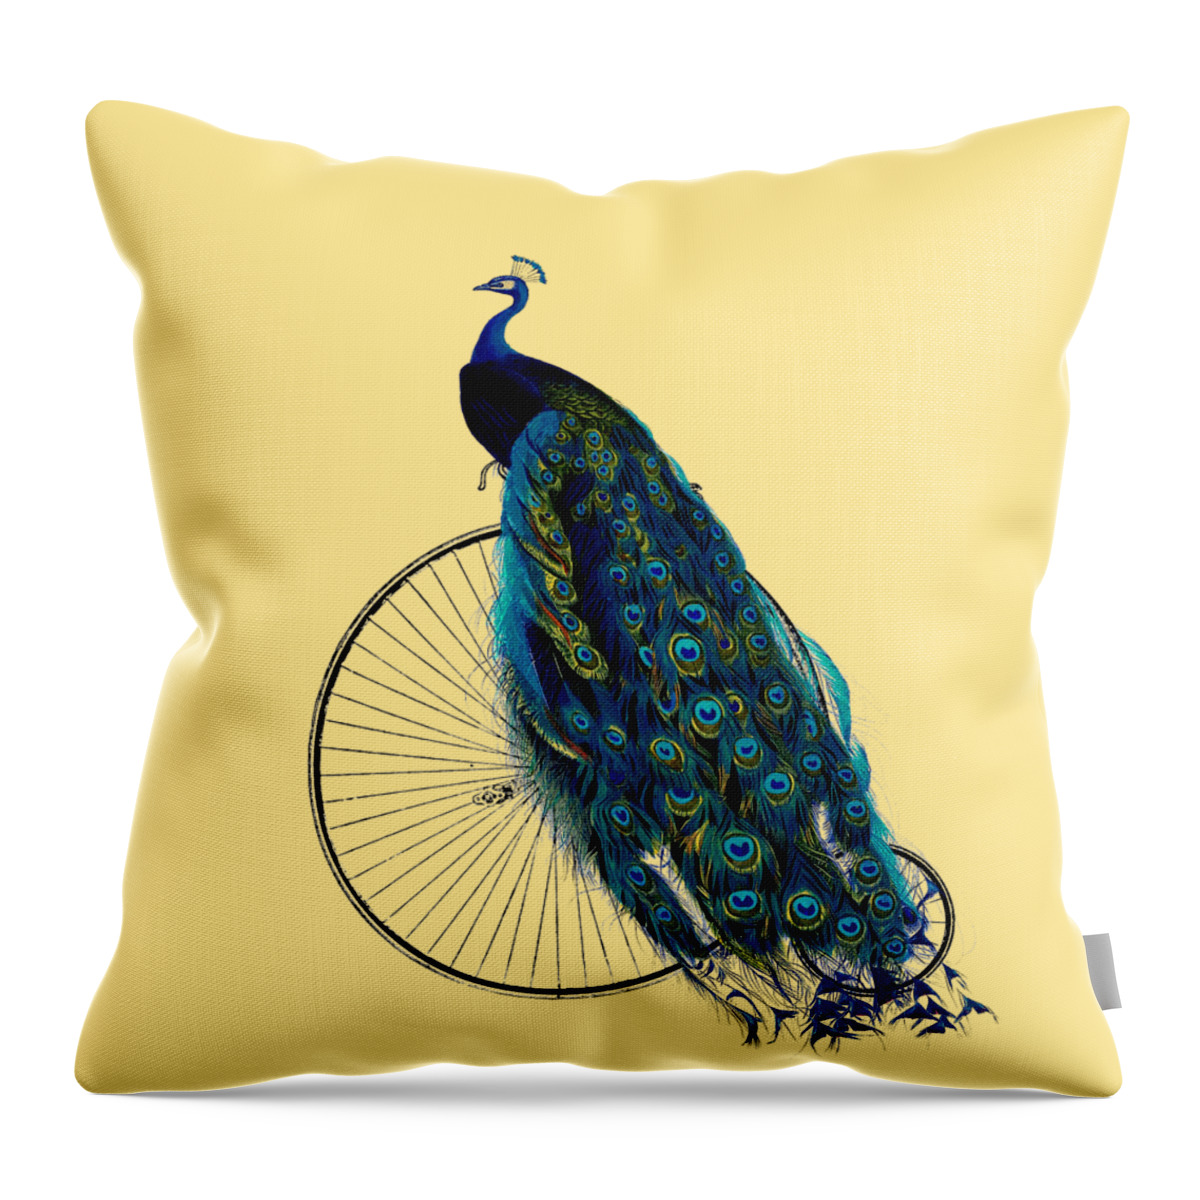 Regal Throw Pillow featuring the digital art Peacock On A Bicycle, Home Decor by Madame Memento